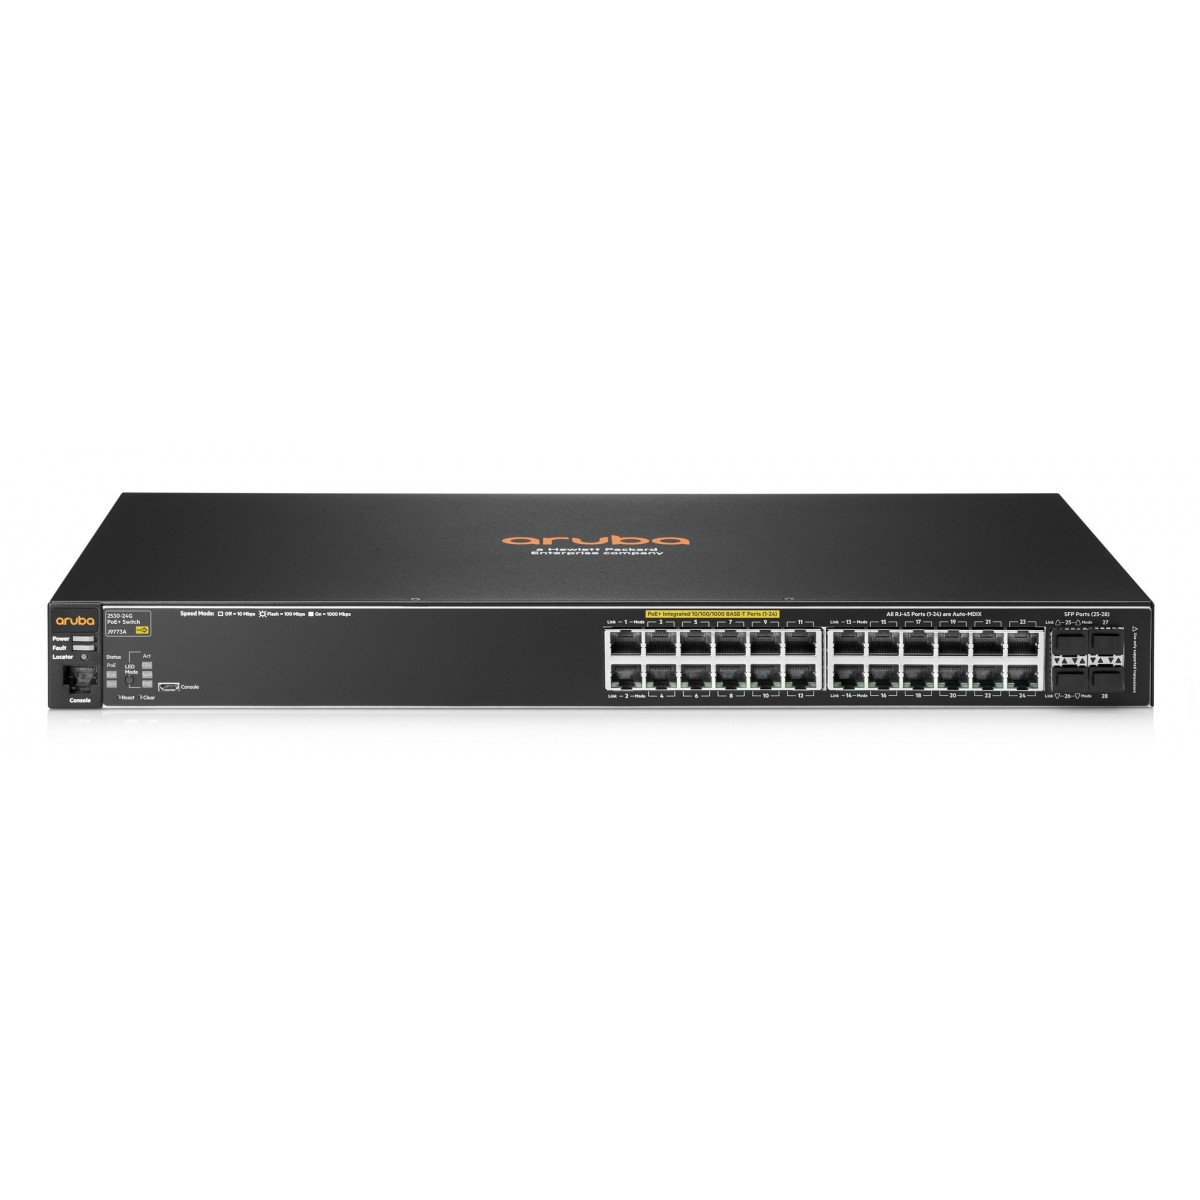 HPE 2530 24G PoE+ Switch - Switch - 1 Gbps